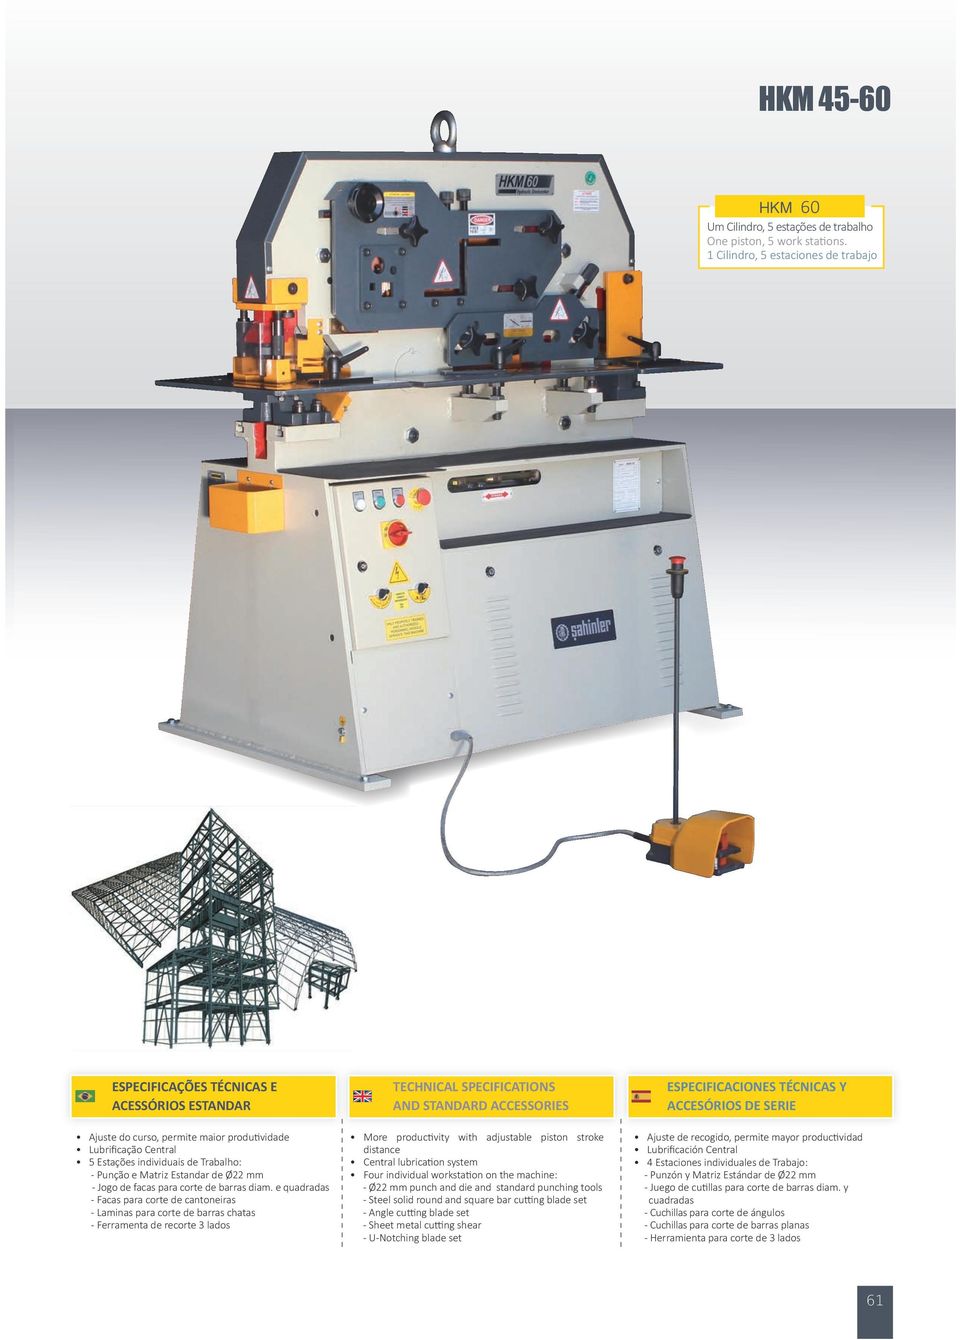 recorte 3 lados More productivity with adjustable piston stroke Central lubrication system Four individual workstation on the machine: - Ø22 mm punch and die and standard punching tools